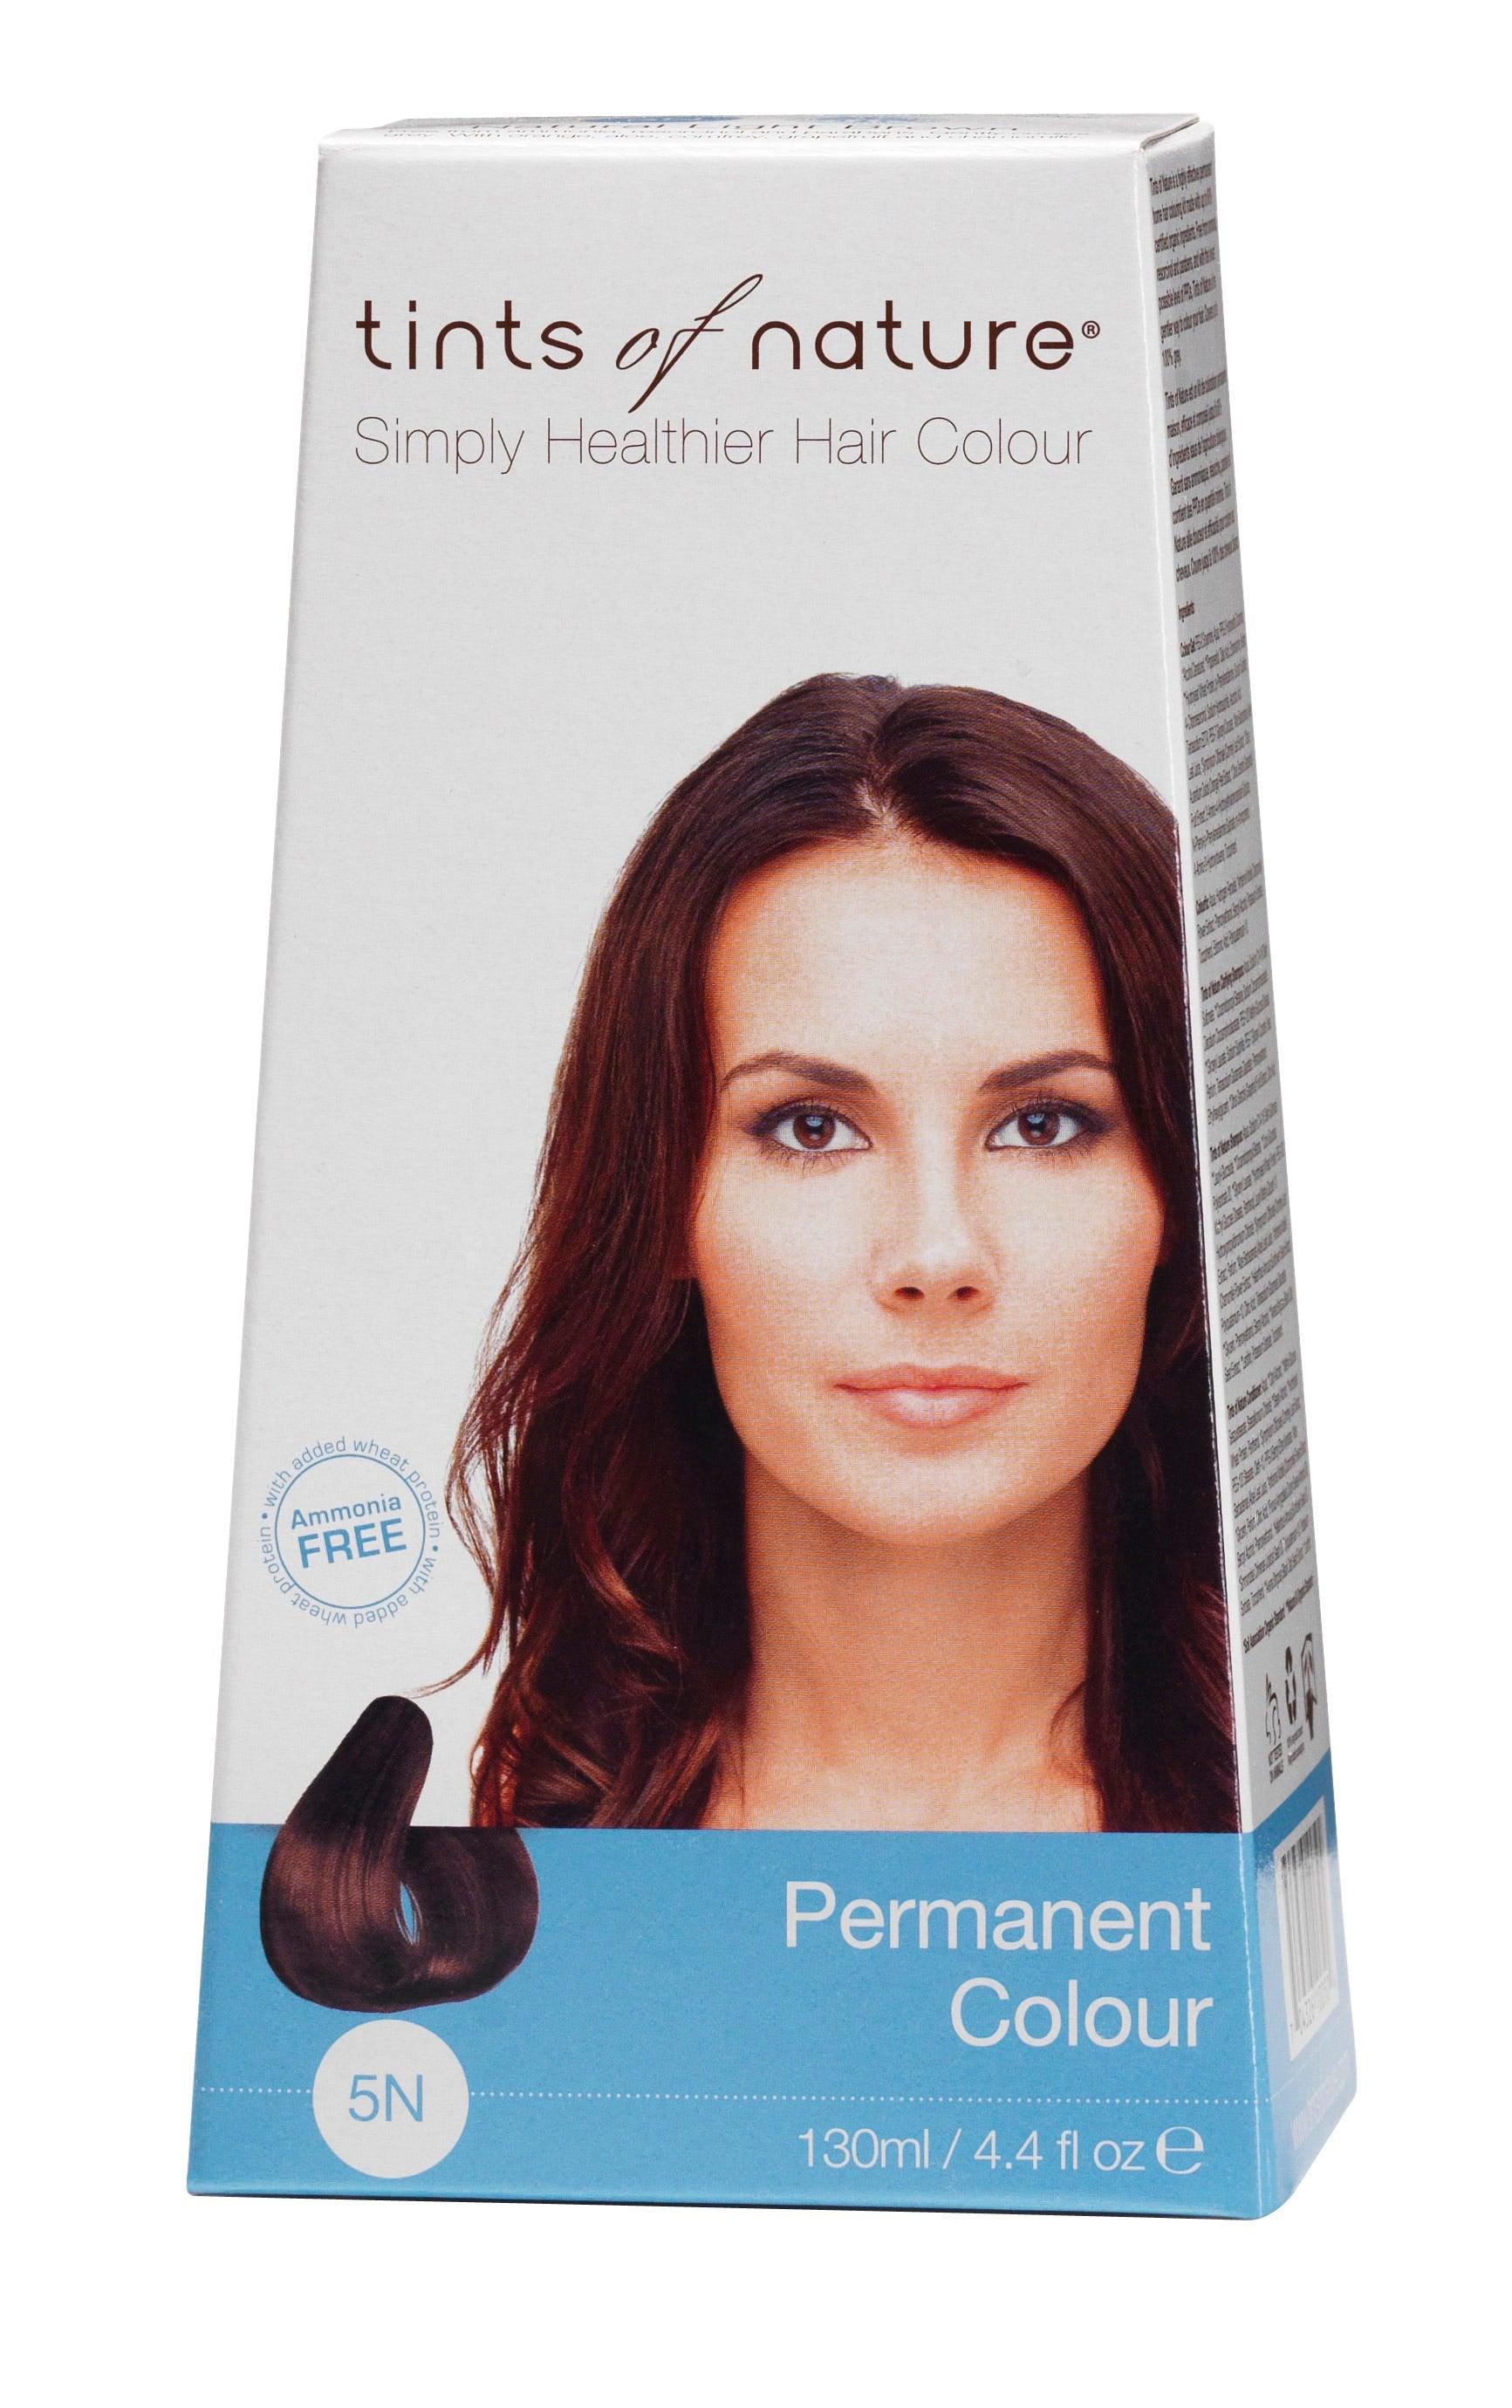 Tints of Nature 5N Natural Light Brown Permanent Hair Color - 130ml